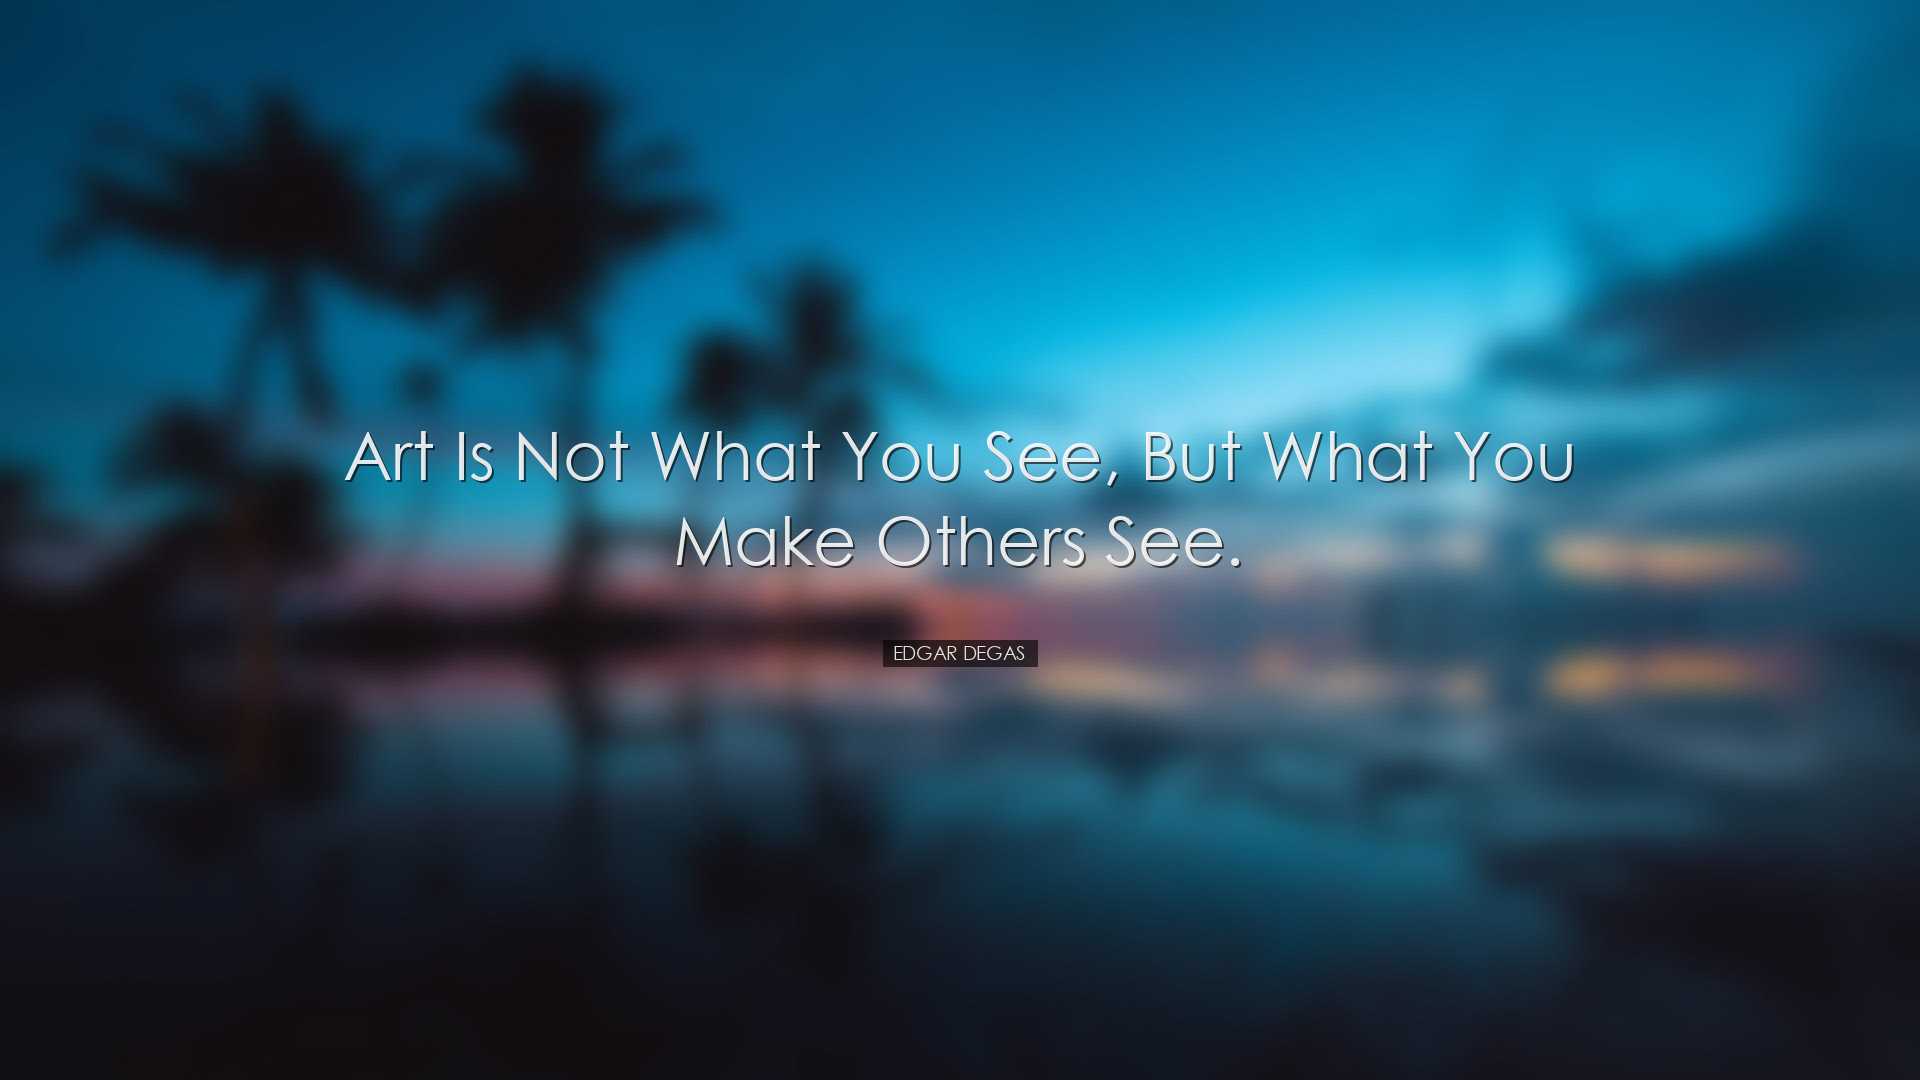 Art is not what you see, but what you make others see. - Edgar Deg